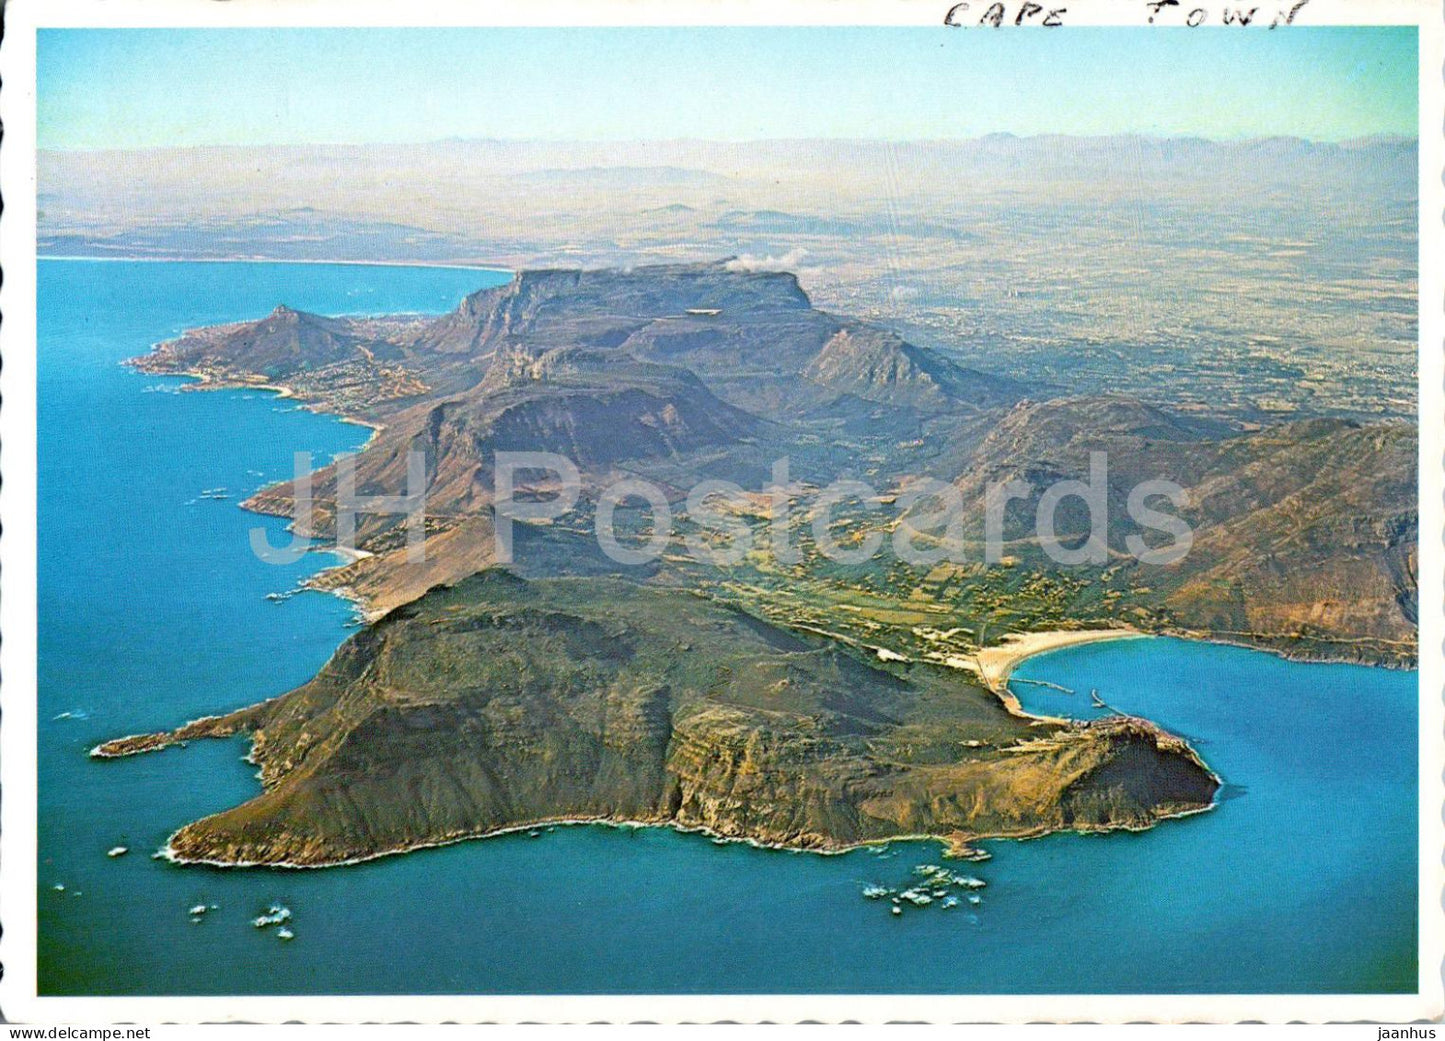 Cape Town - A dramatic view of the back Table Mountain - 50 A - South Africa - used - JH Postcards